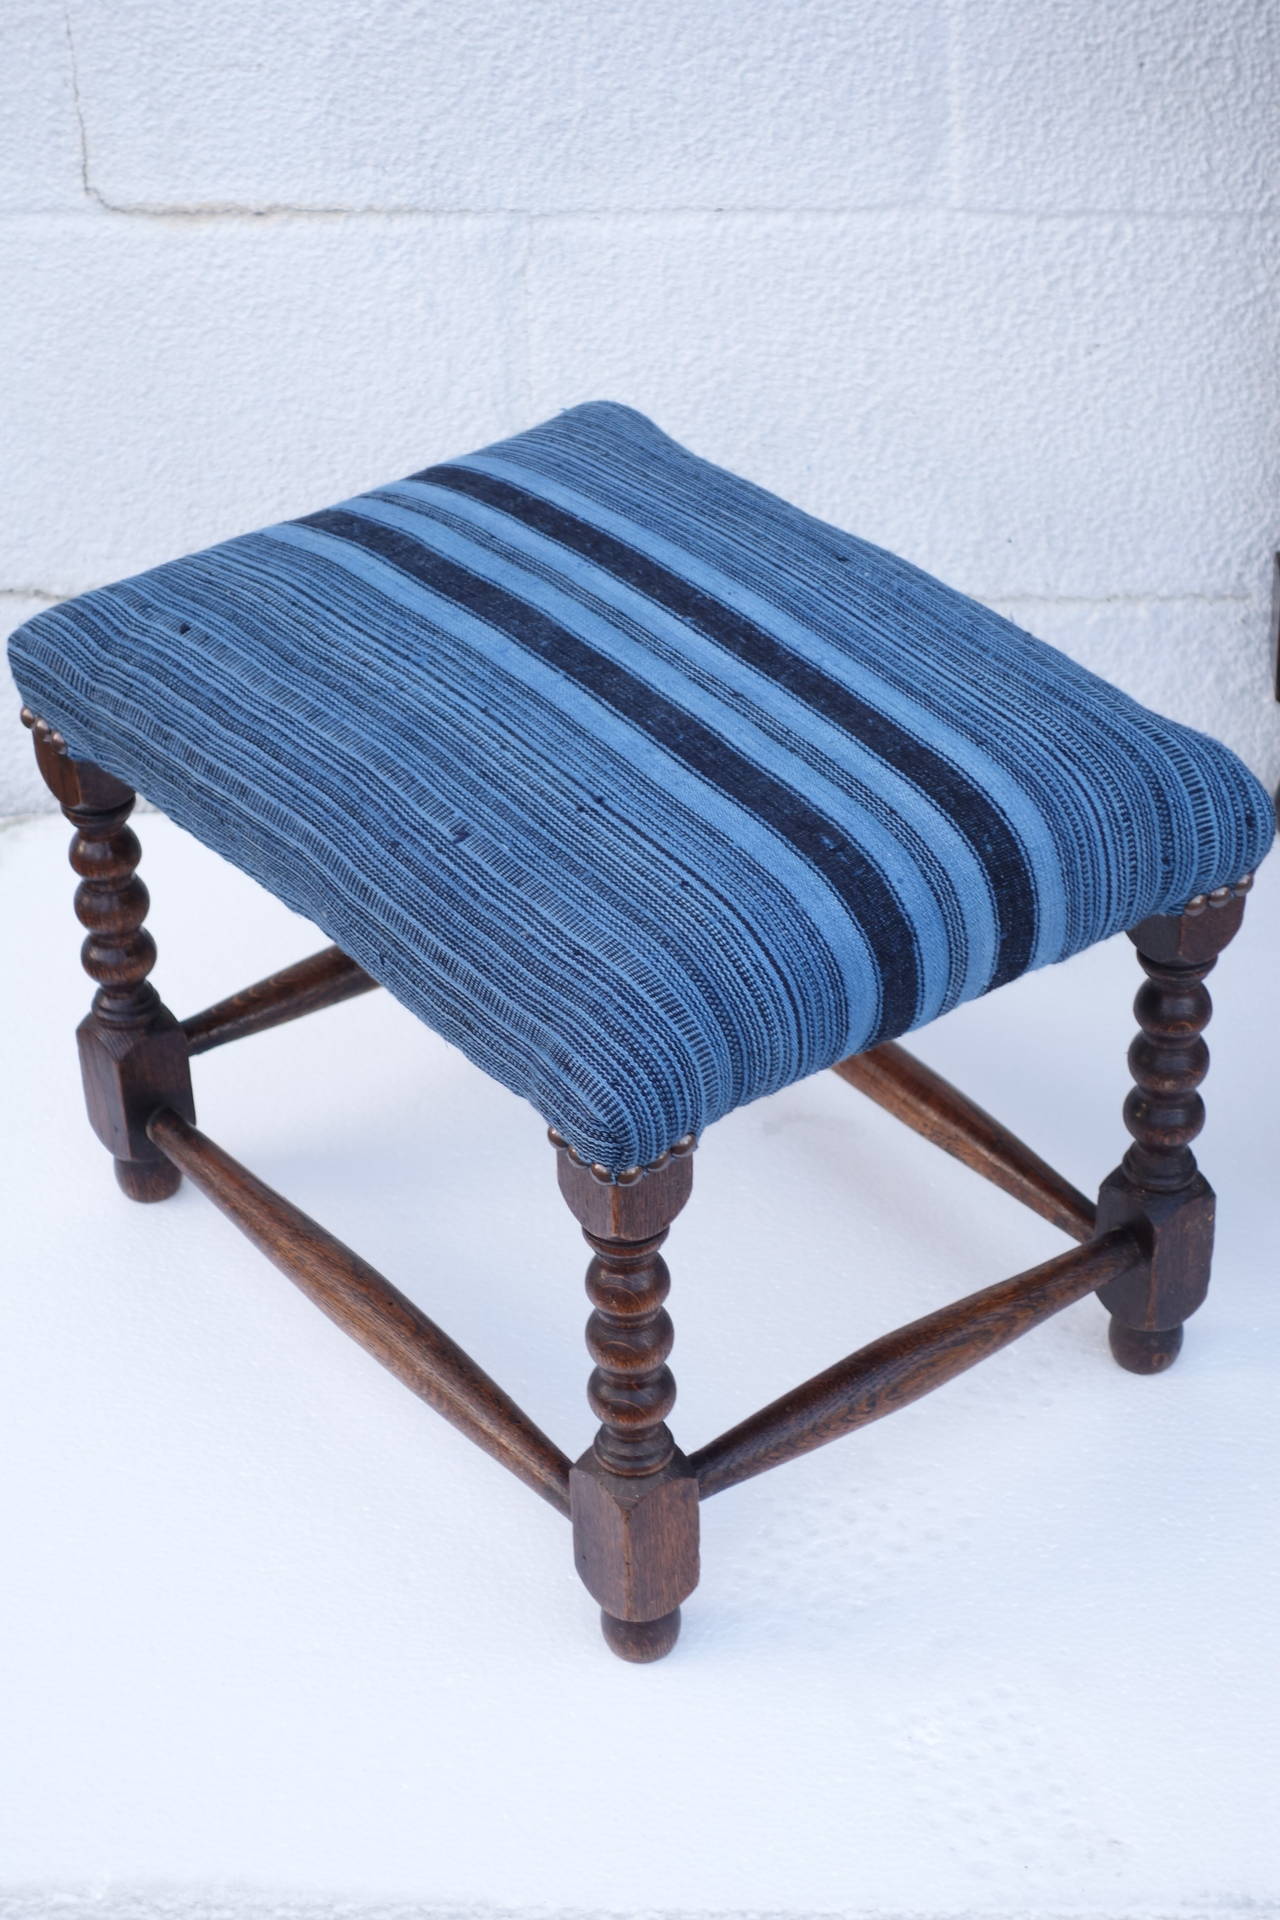 English stools newly reupholstered in antique indigo fabric. Dimensions shown for largest stool. Could also be sold separately, please contact for more information.